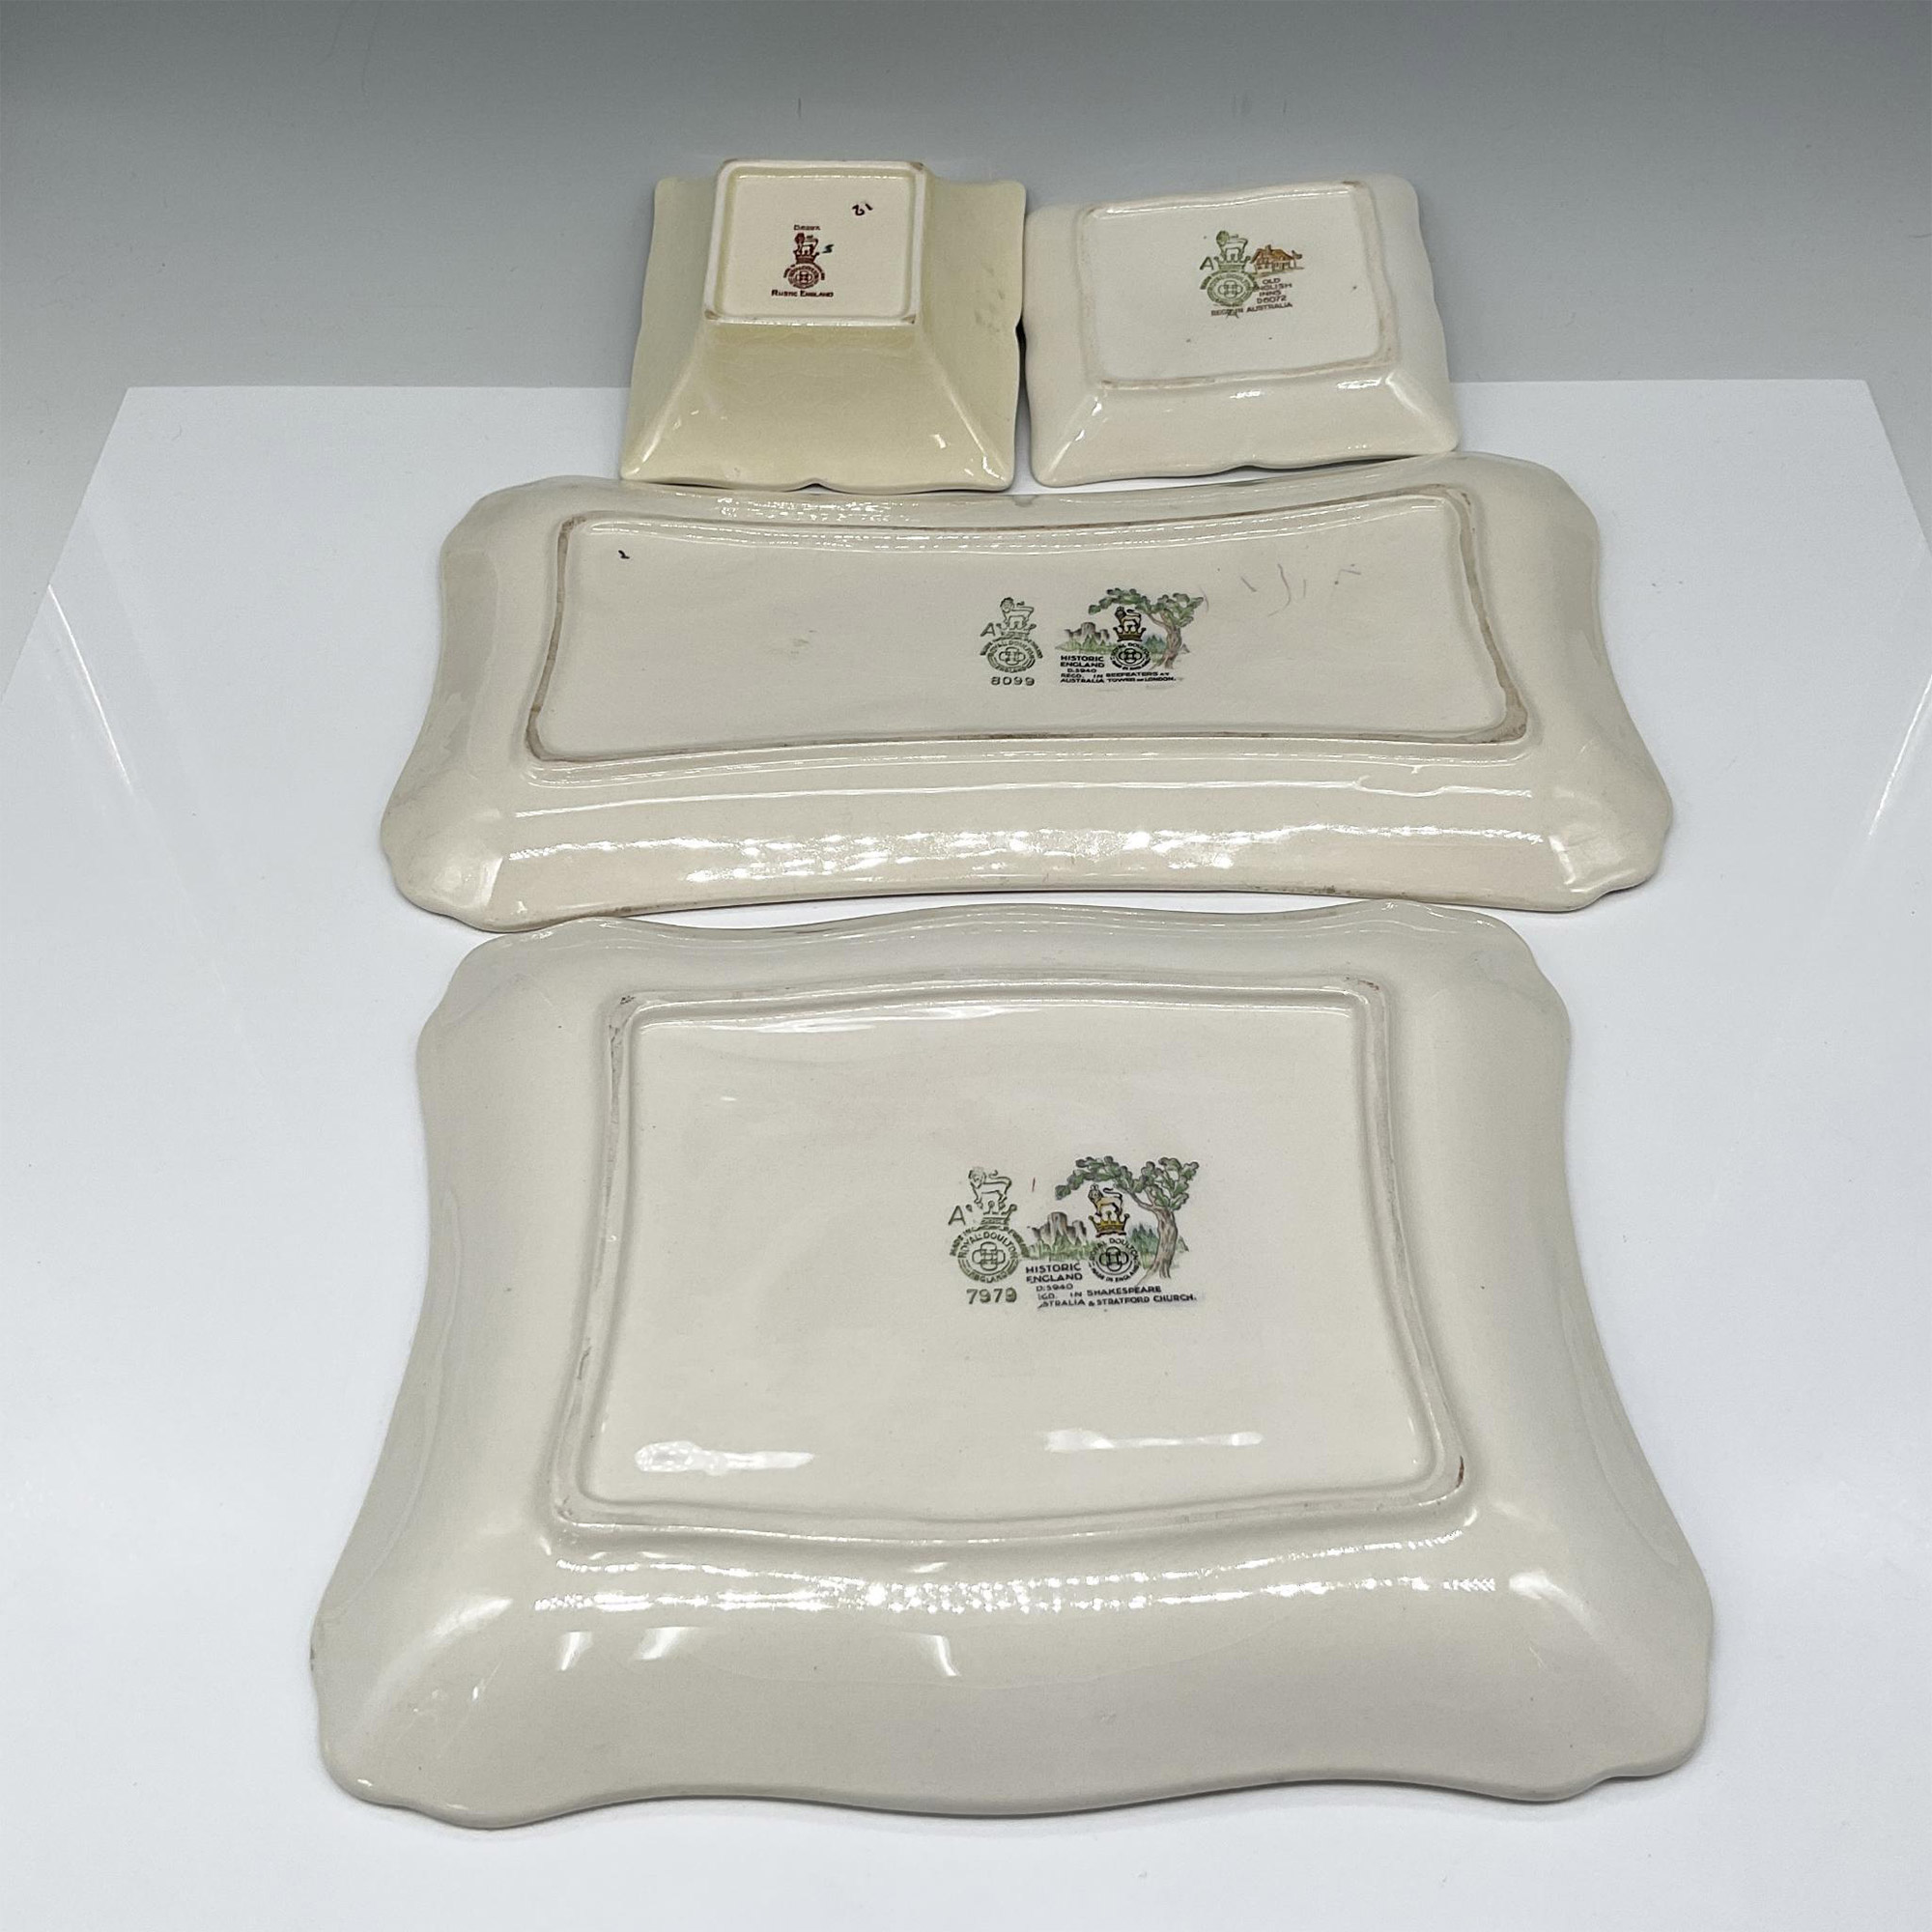 4pc Royal Doulton Series Ware Trays, Historic England - Image 3 of 3